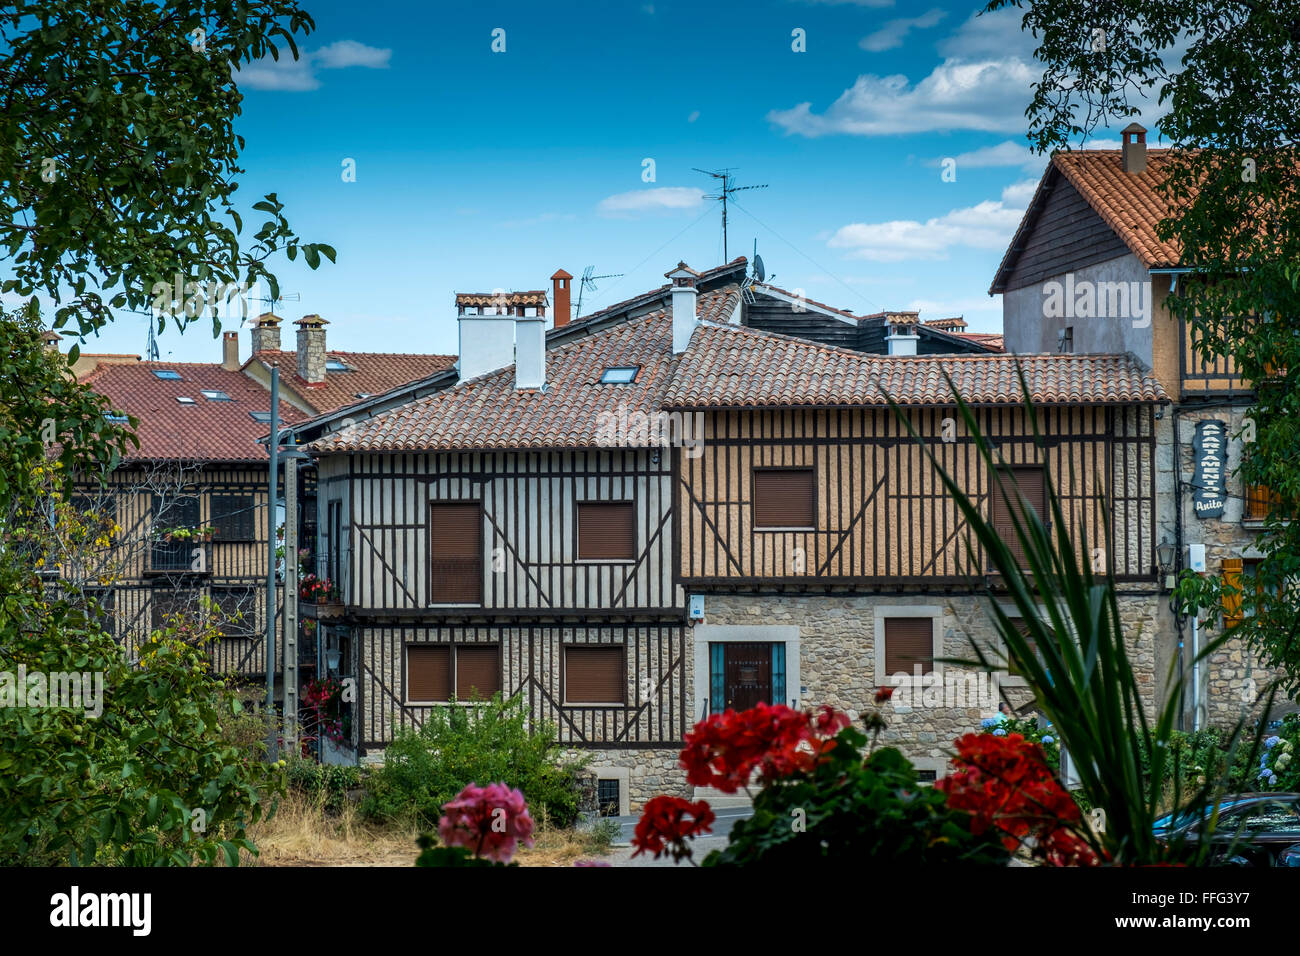 New houses must be built in the style of the medieval originals by law. La Alberca, Castille y Leon. Spain Stock Photo